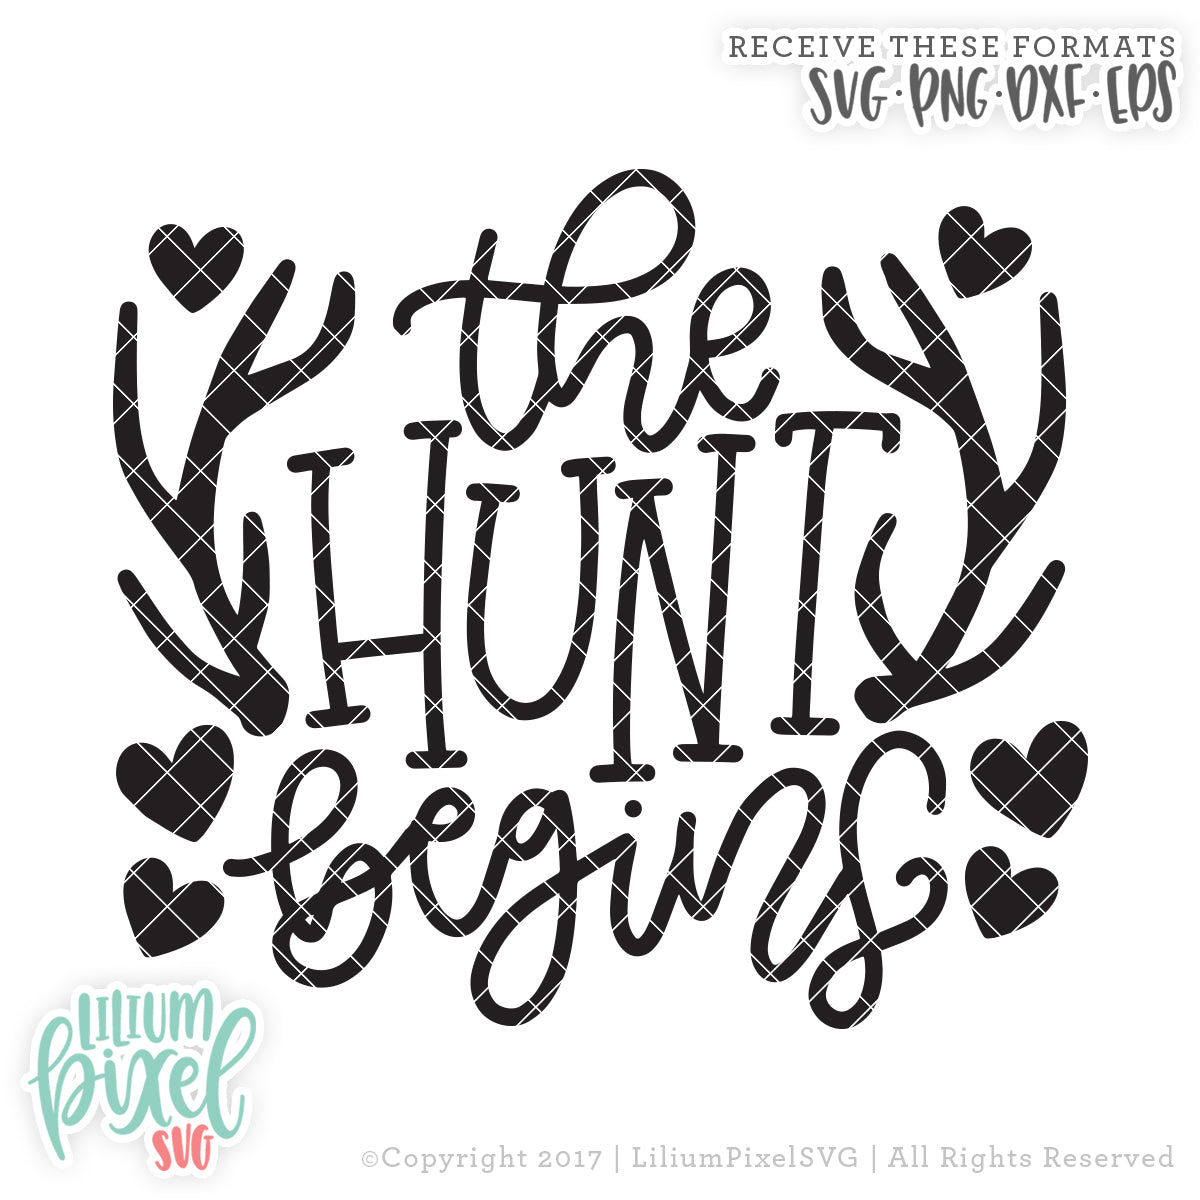 The Hunt Begins - SVG PNG DXF EPS Cut File • Silhouette • Cricut • More